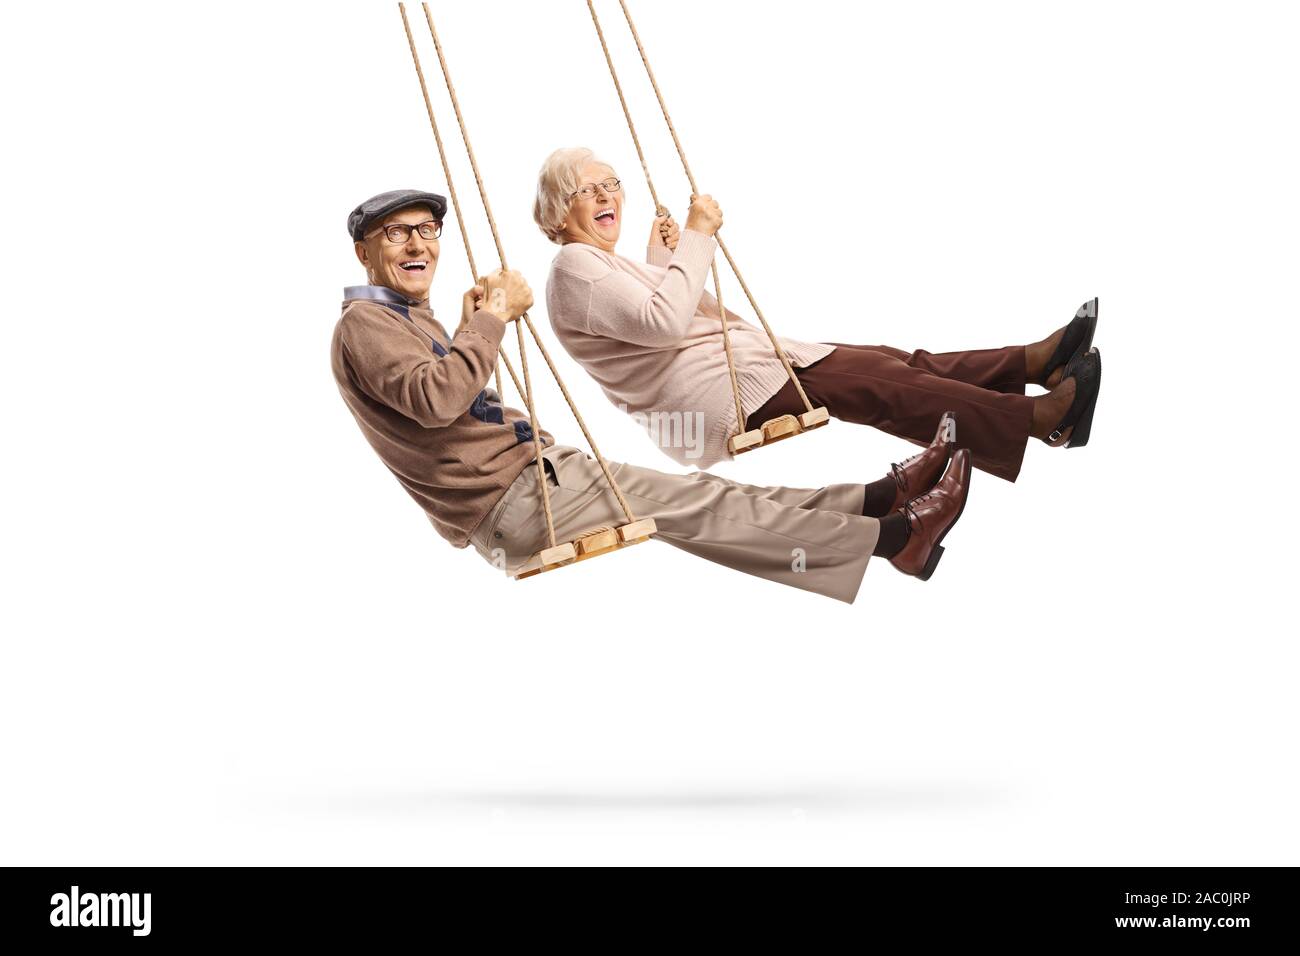 Elderly man and woman swinging and laughing isolated on white background Stock Photo